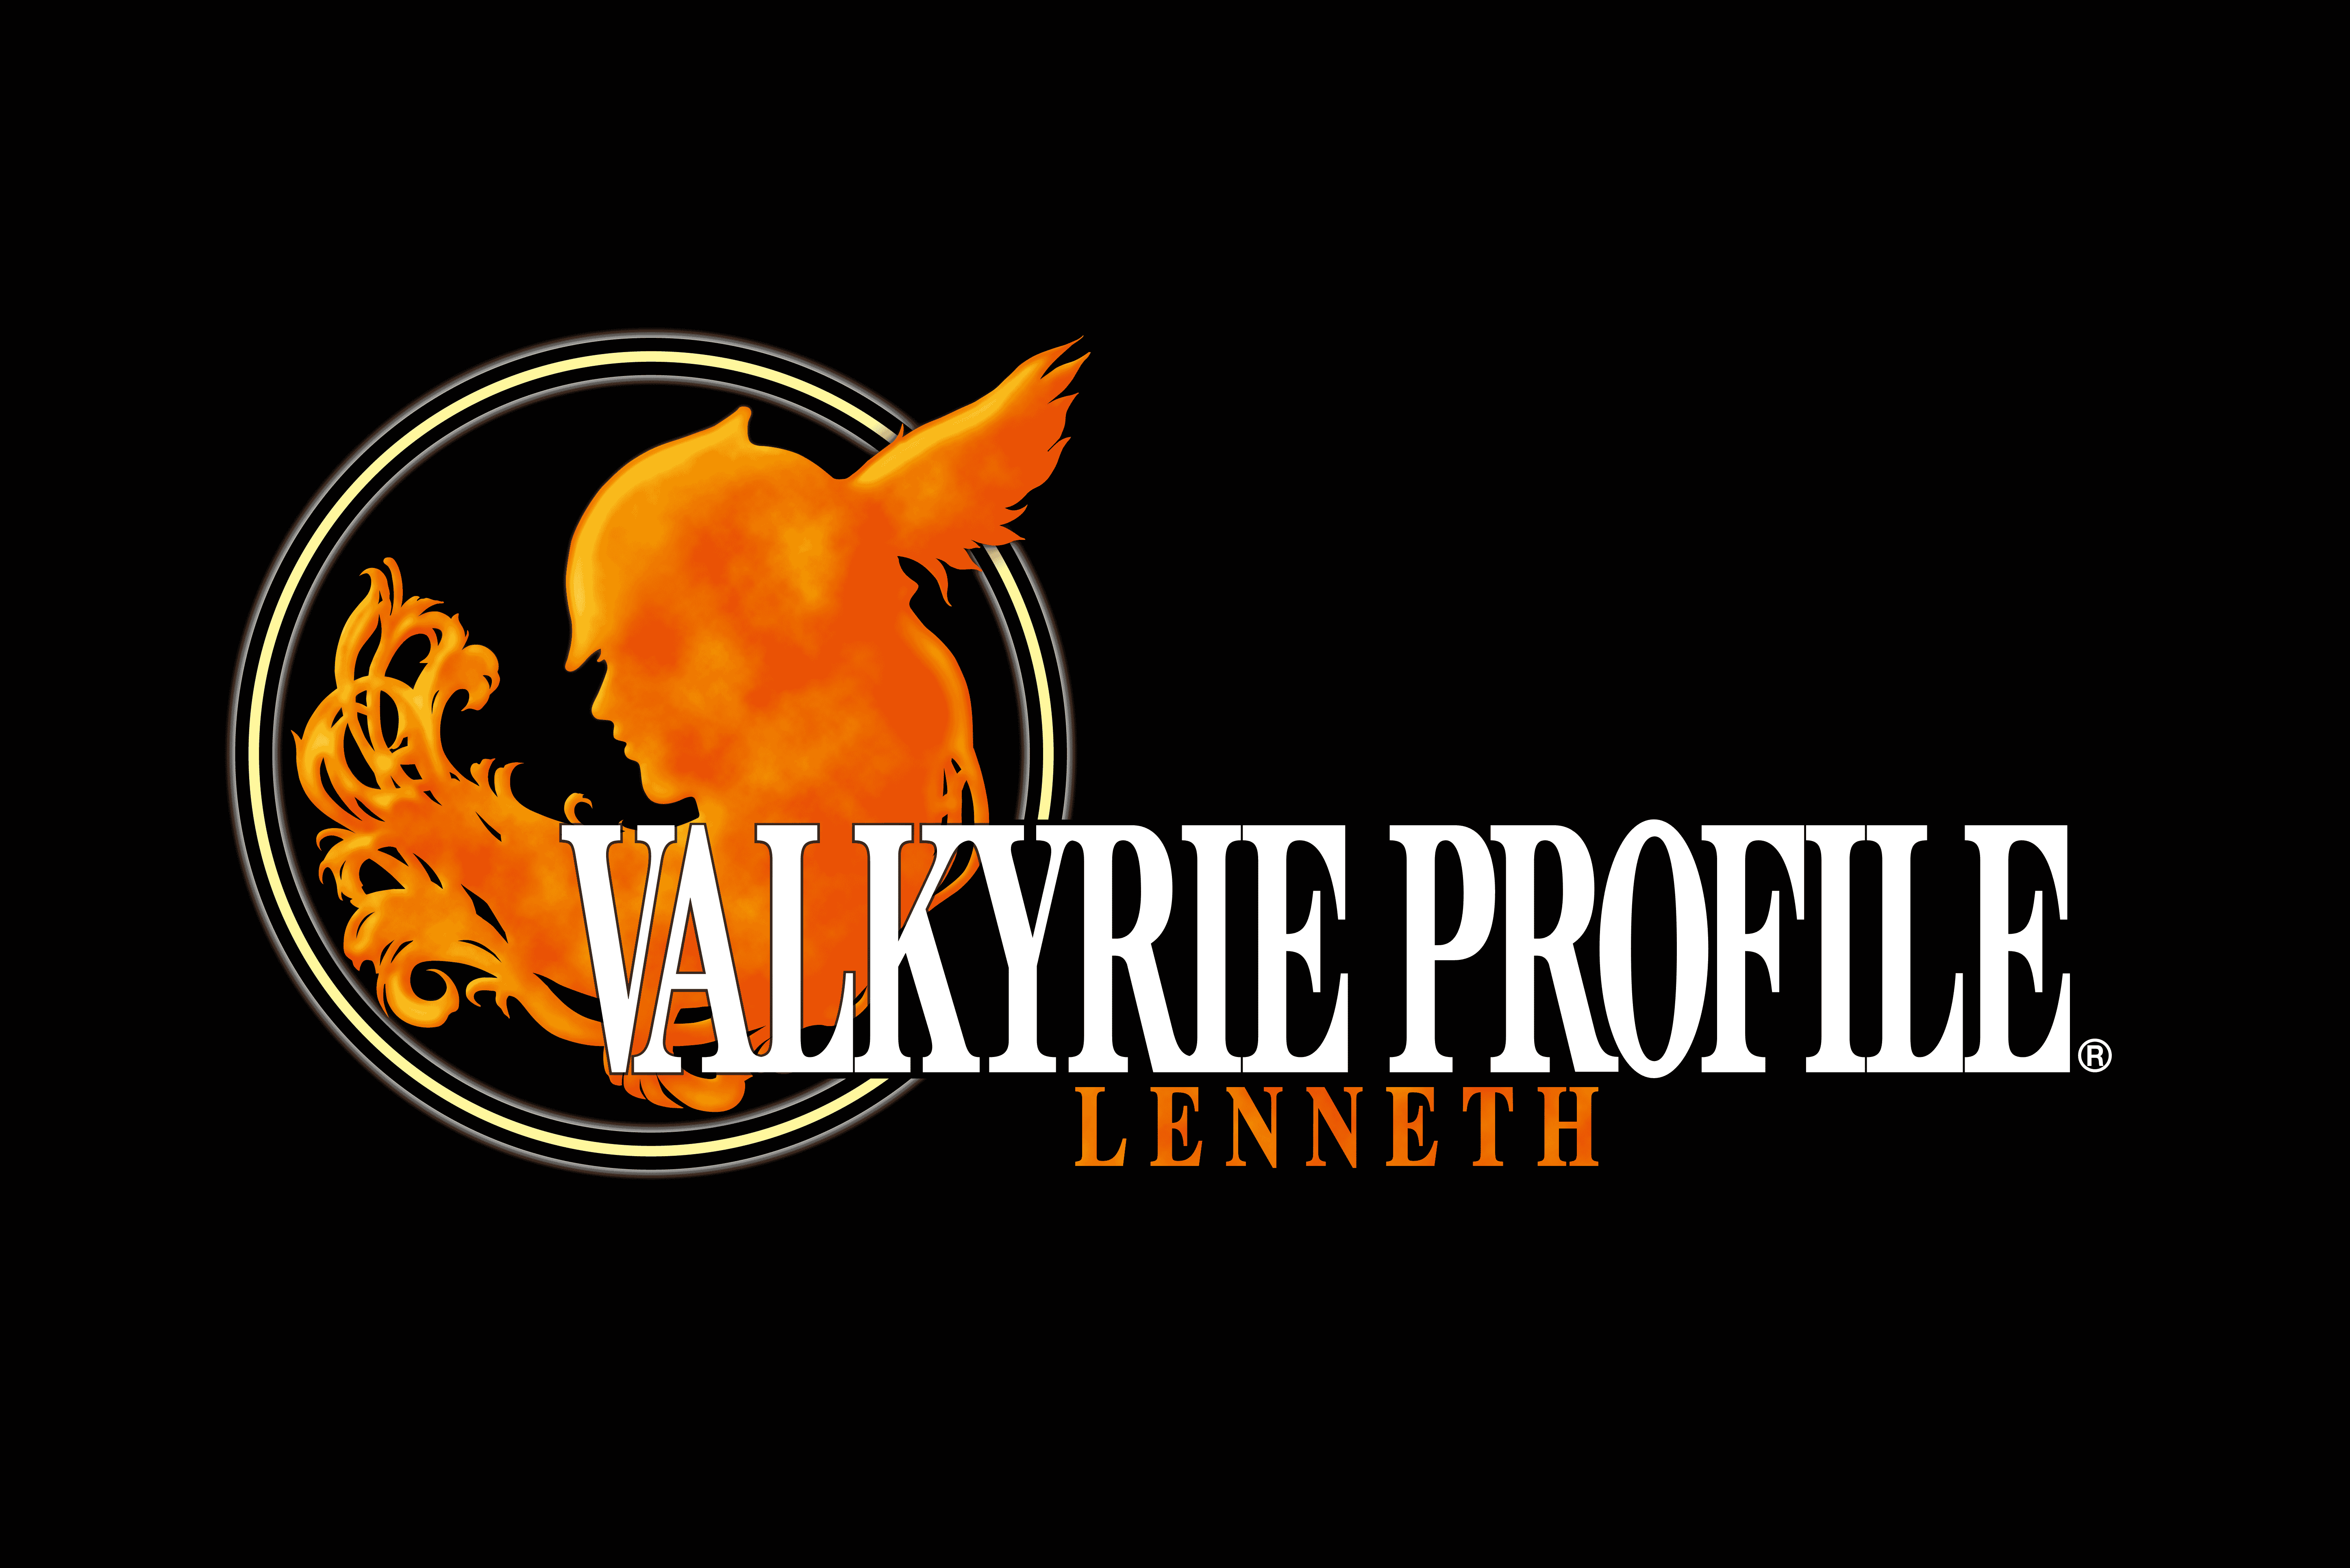 valkyrie profile lenneth delayed